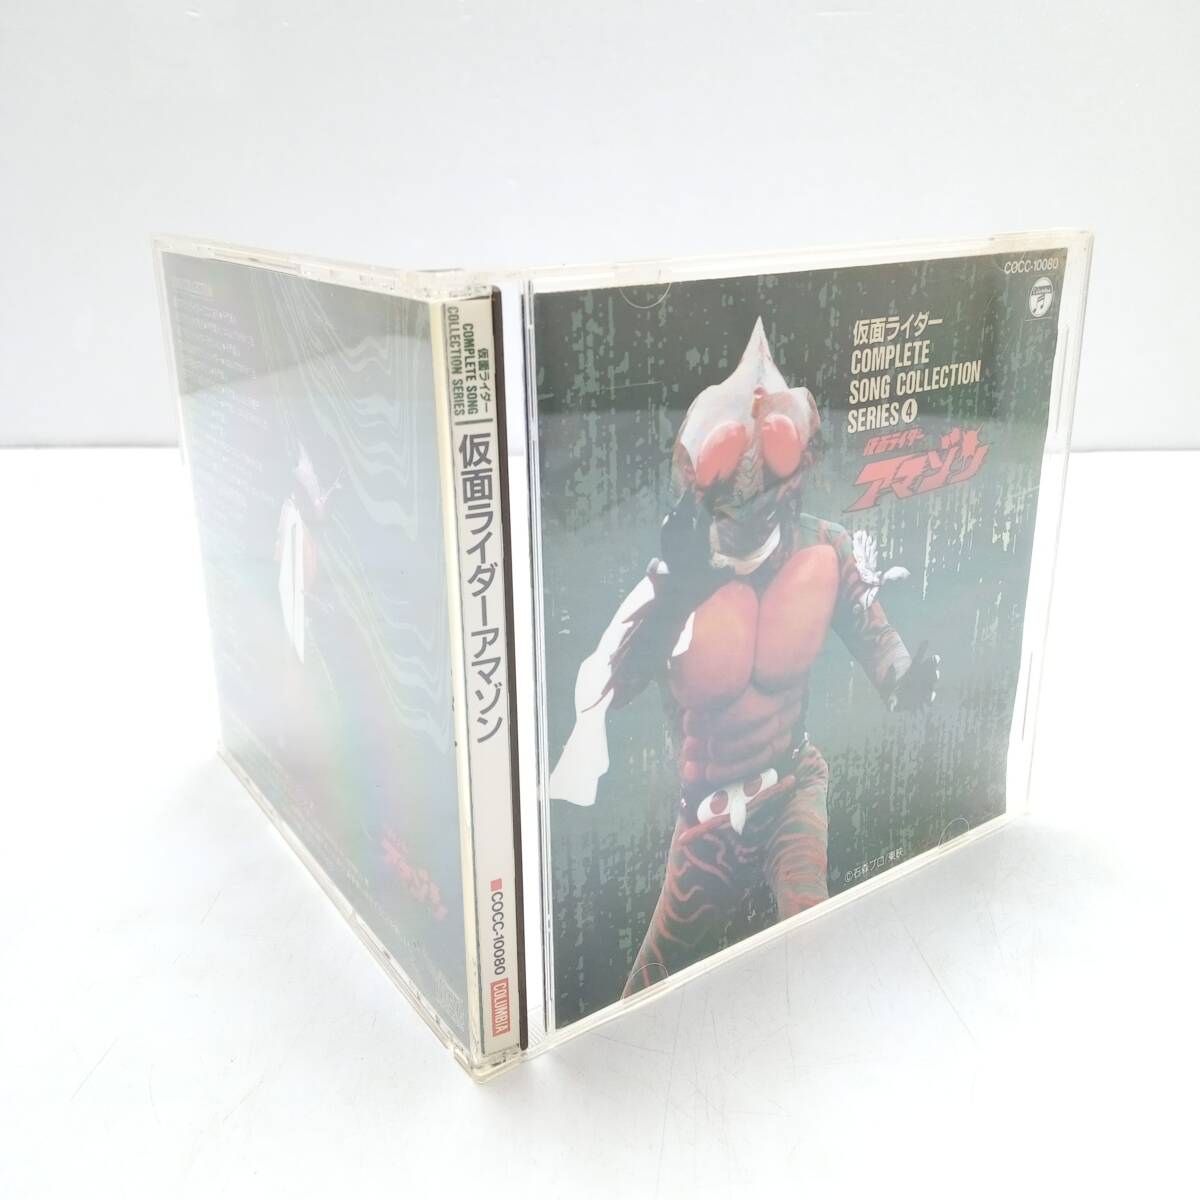 【W404】★中古★CD　仮面ライダー アマゾン　COMPLETE SONG COLLECTION　SERIES4　石森プロ　子門真人 _画像4